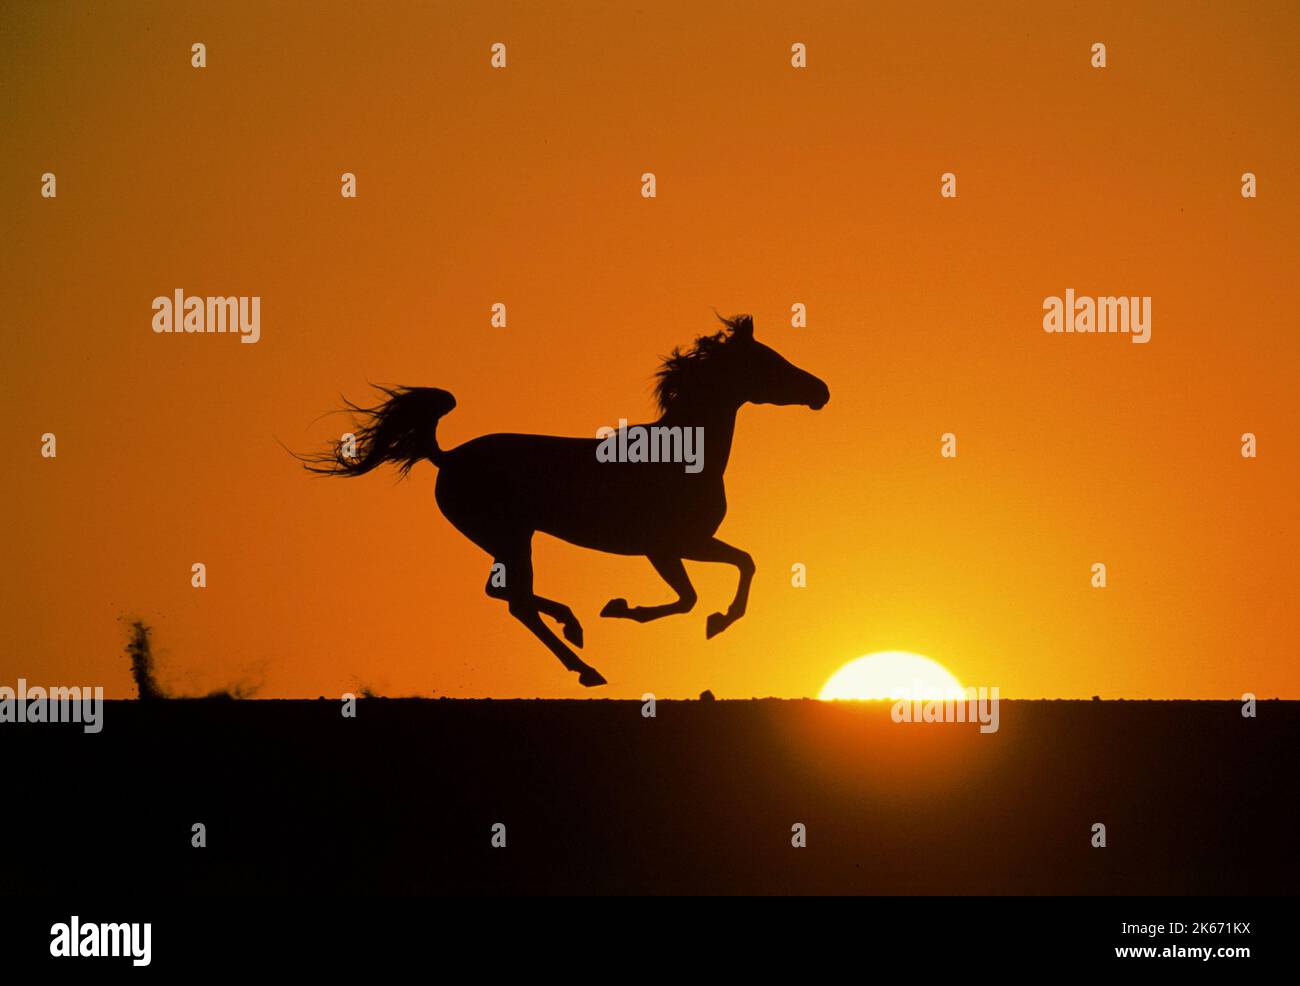 THE BLACK STALLION IN SUNSET, THE YOUNG BLACK STALLION, 2003 Stock Photo